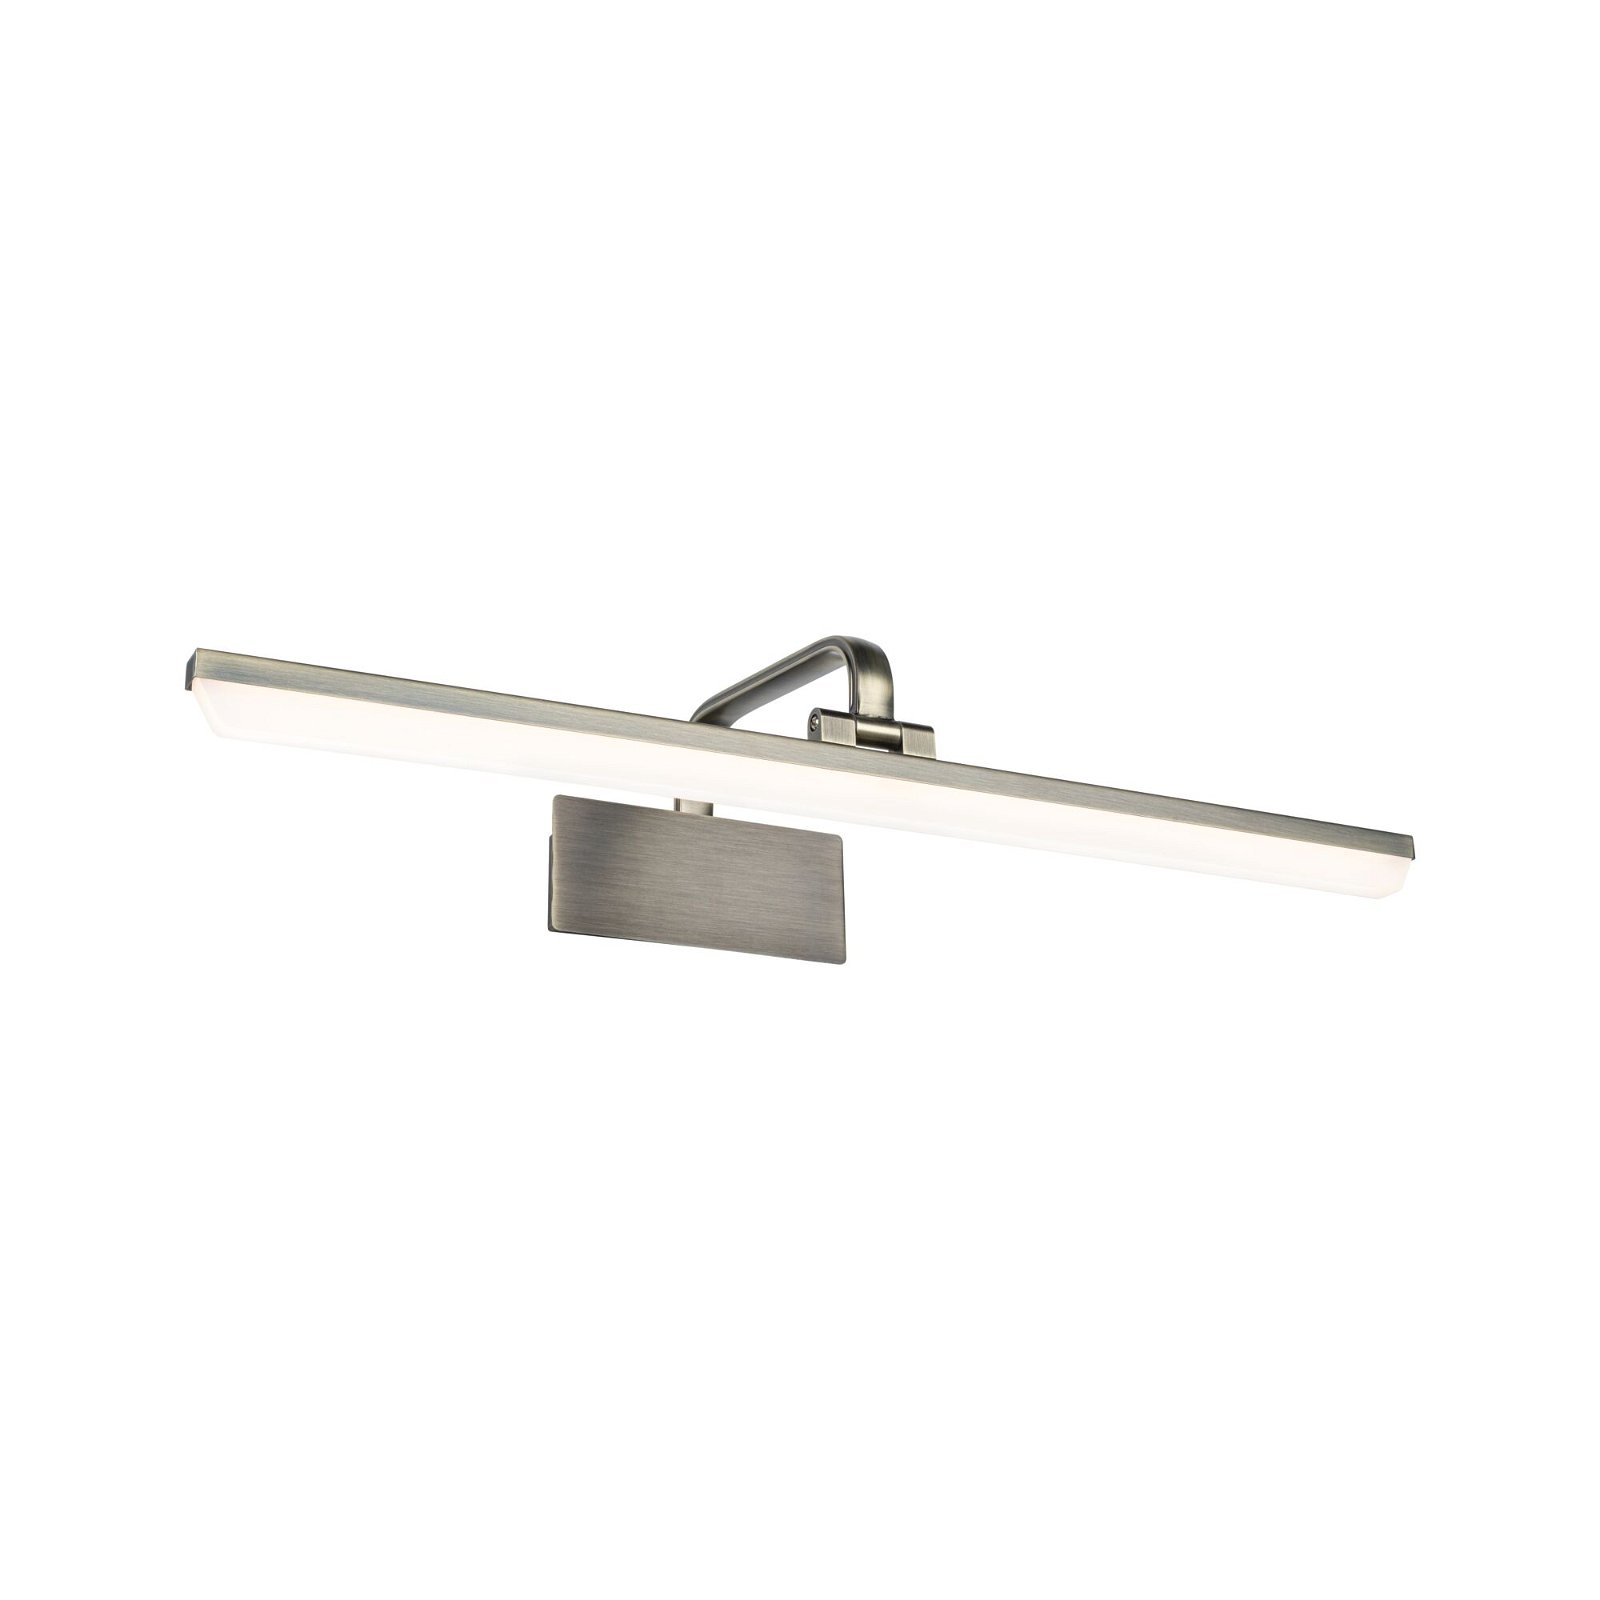 LED Picture luminaire Renan 3000K 880lm 230V 11W Old brass